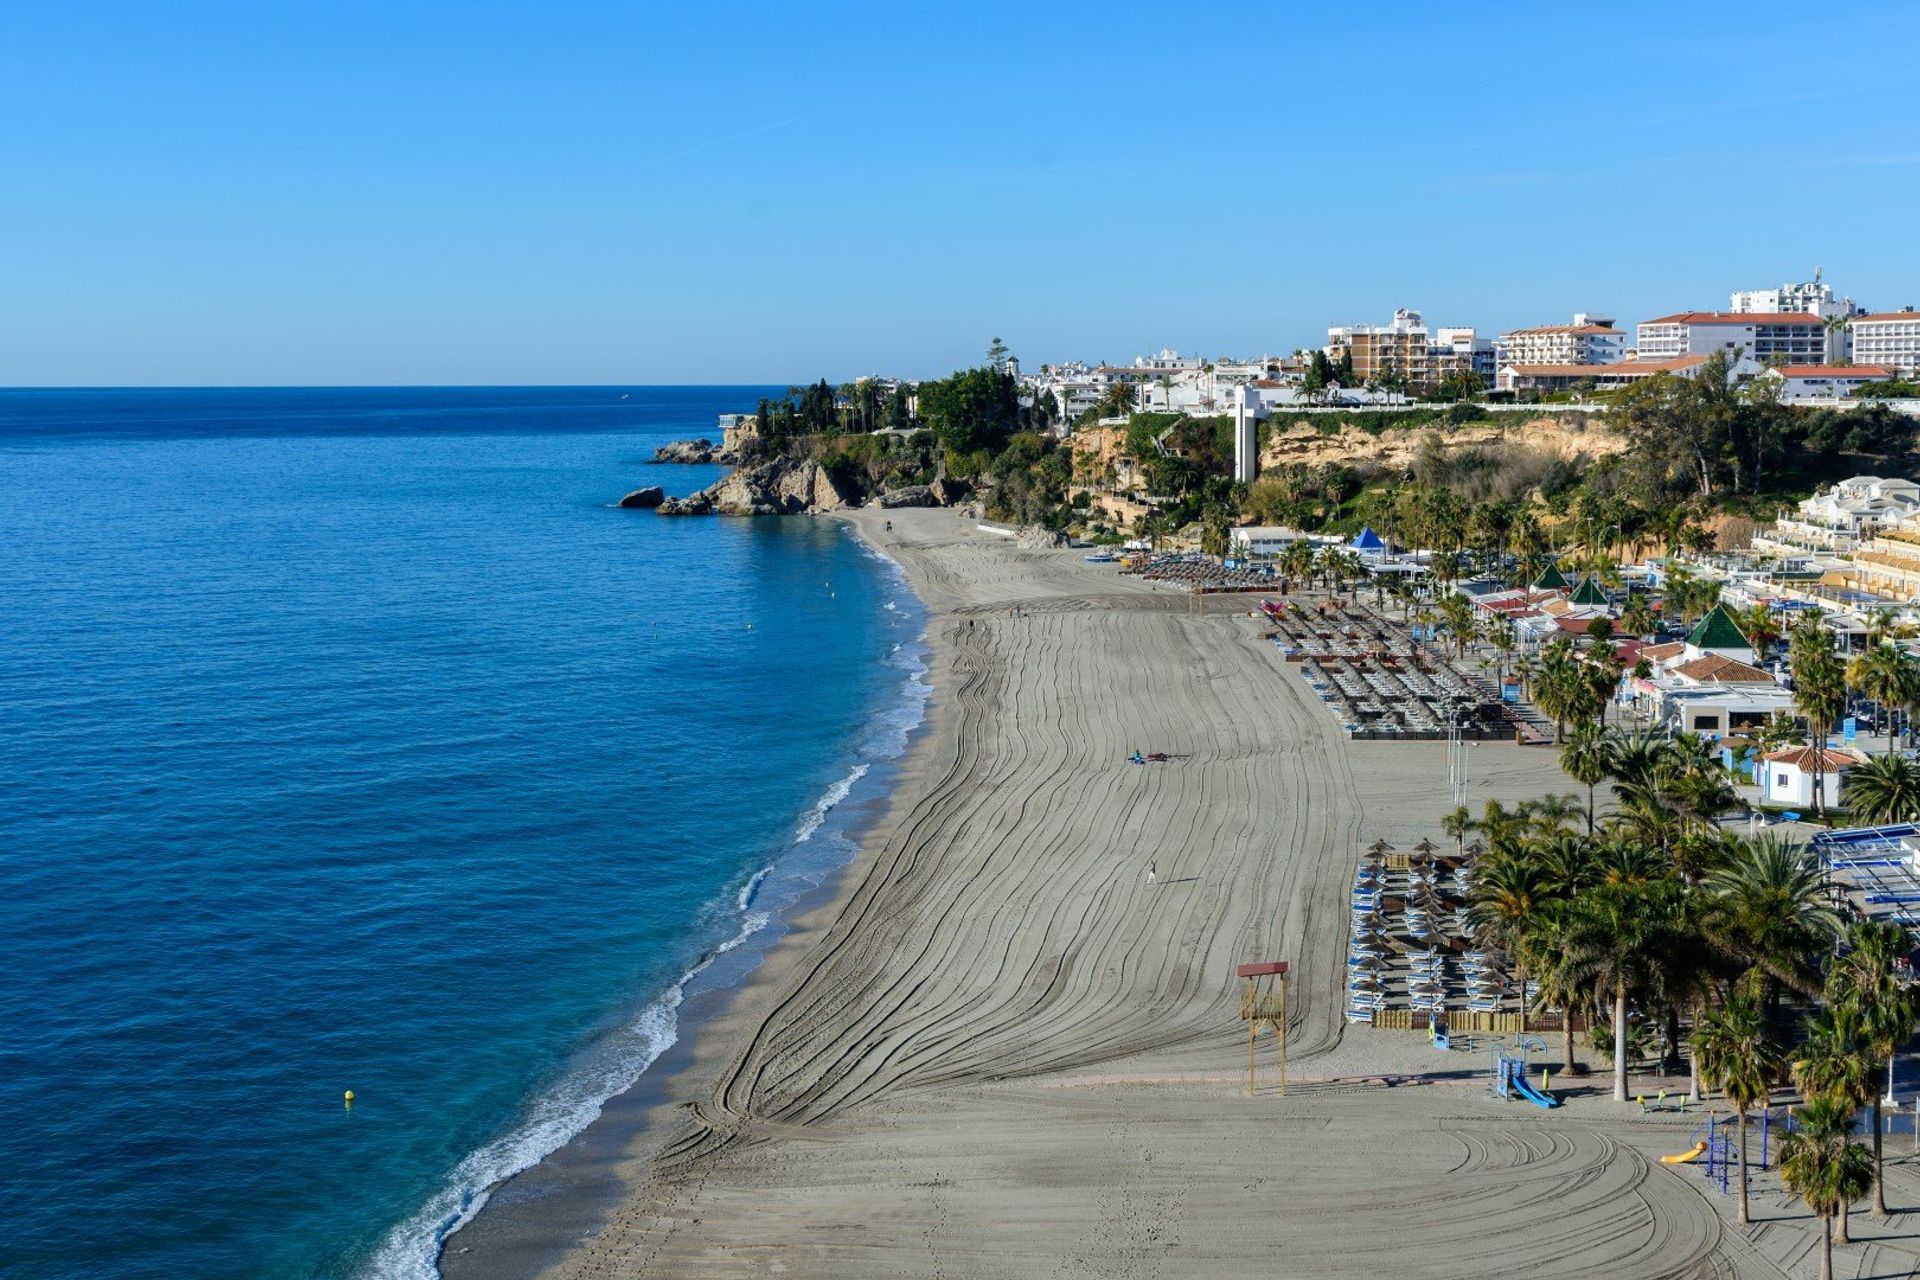 Burriana beach in Nerja offers boat rentals, water sports and restaurants, 5 minutes from the town centre